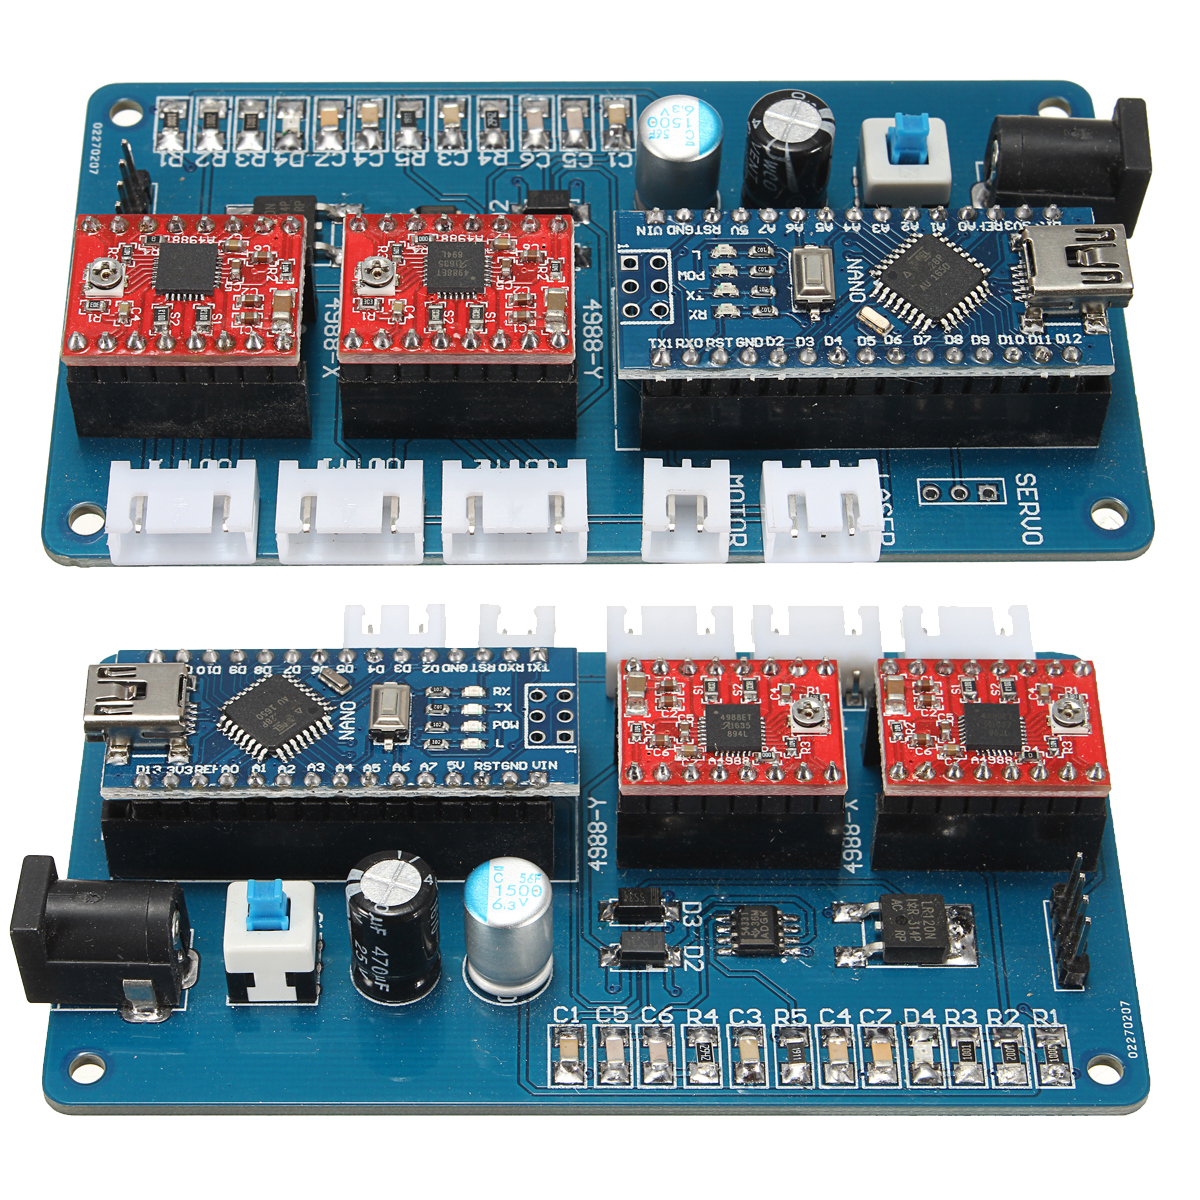 2 Axis GRBL Control Panel Board For DIY Laser Engraving Machine Benbox USB Stepper Driver Board 17